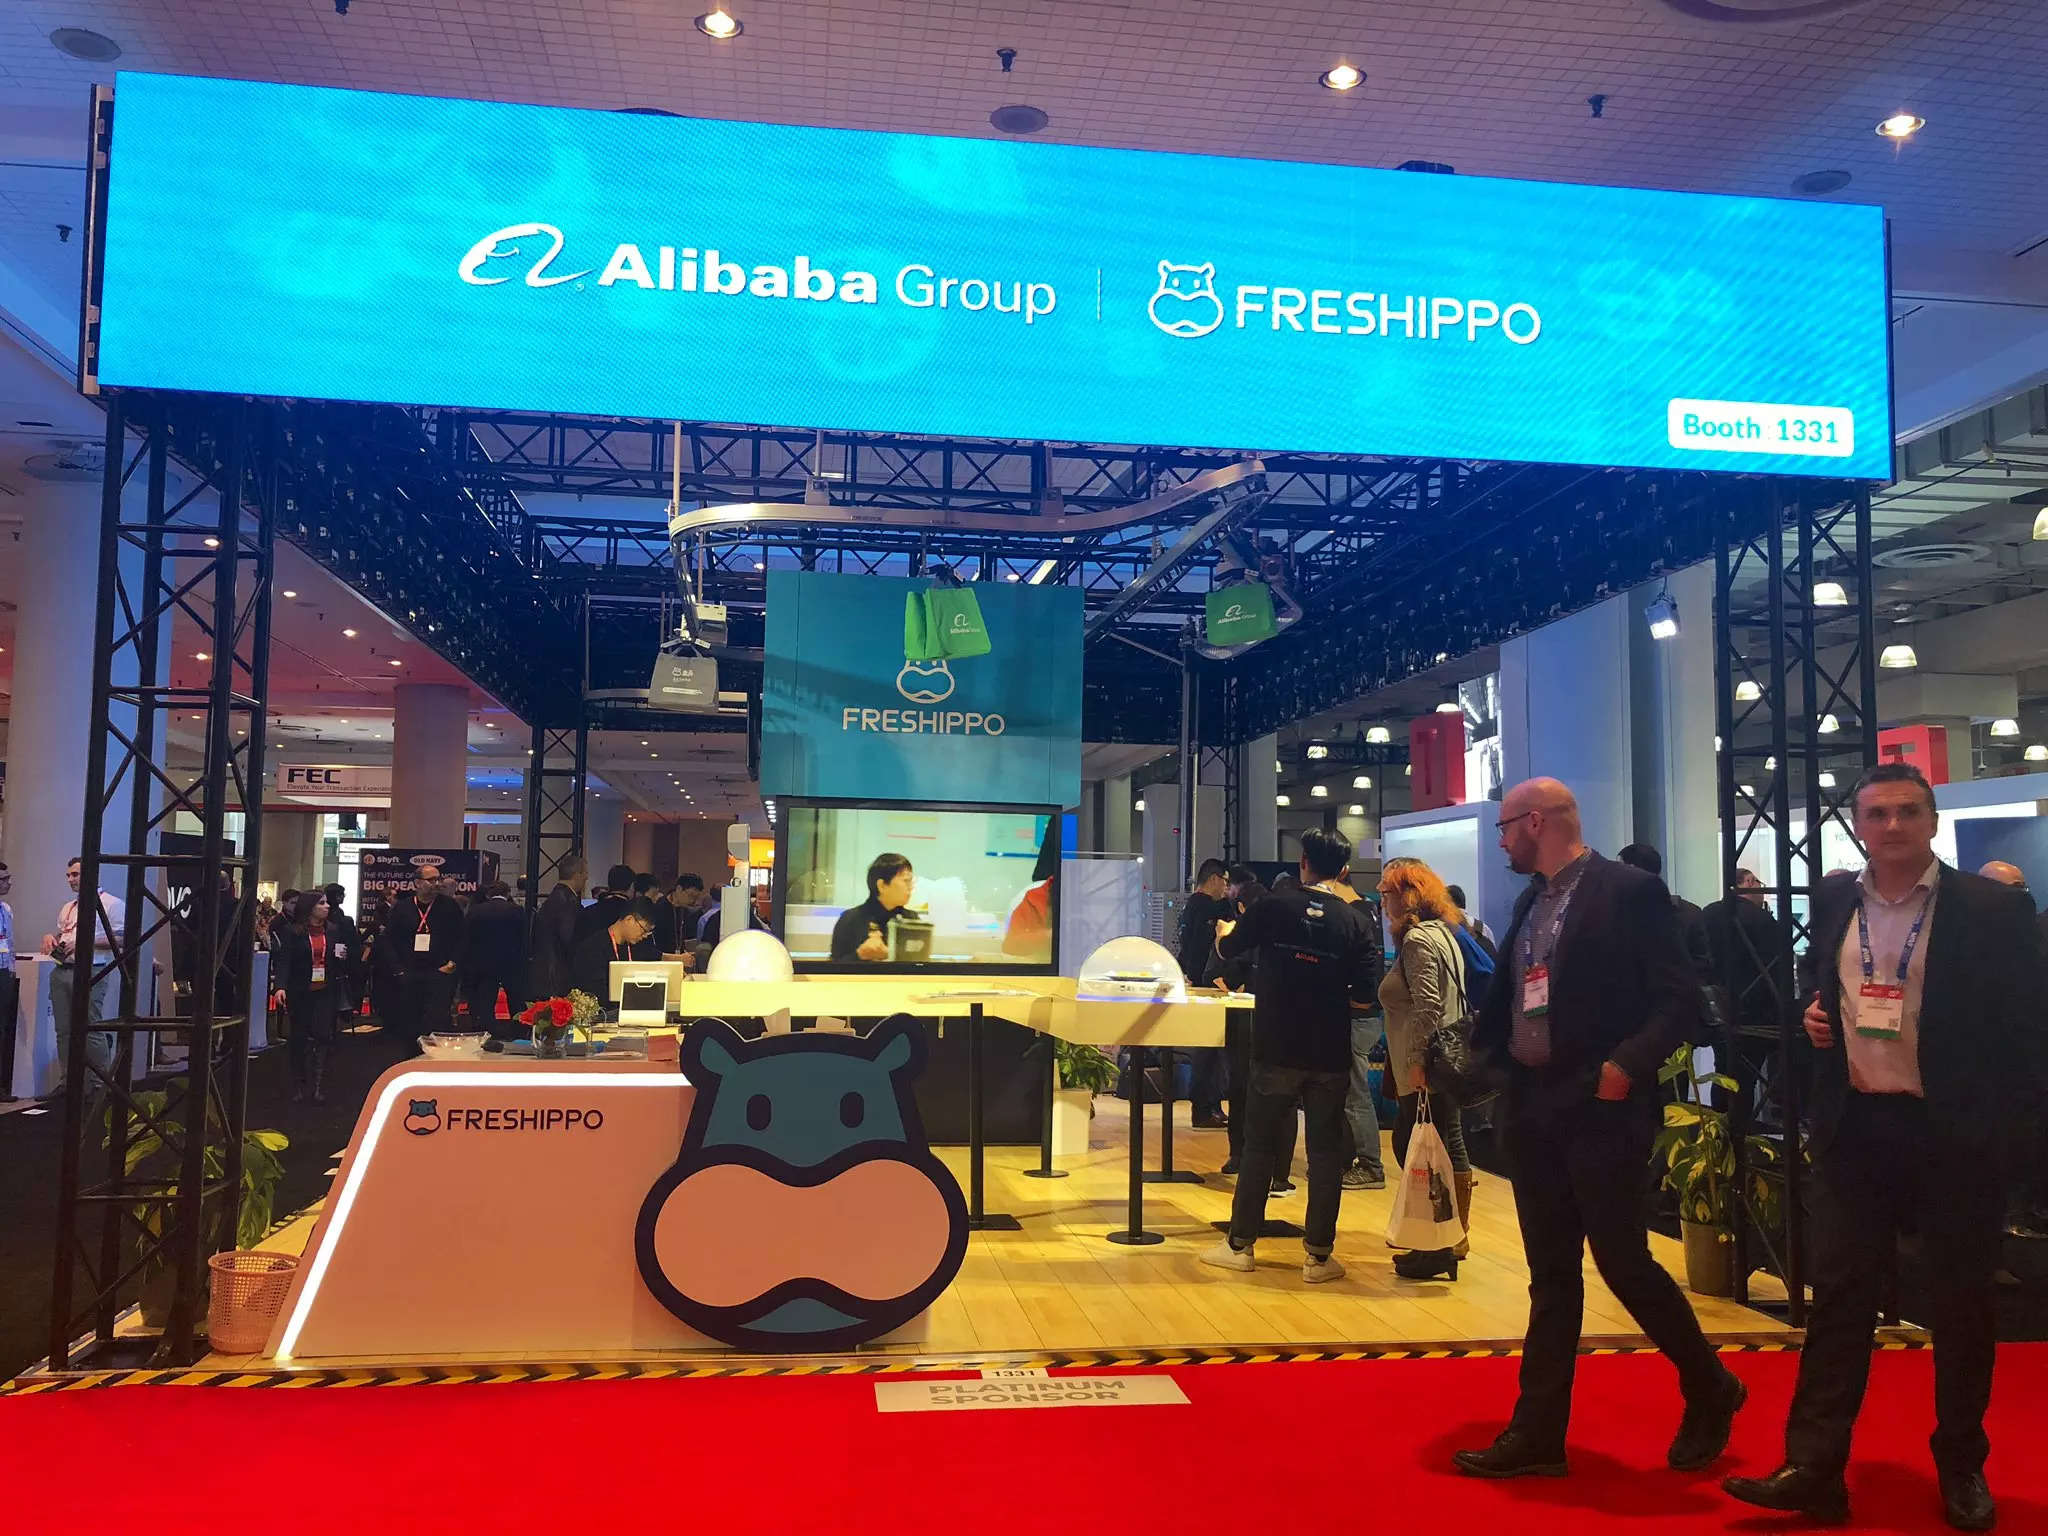 Alibaba's Freshippo seeks funds at much lowered $6 billion valuation - Sources